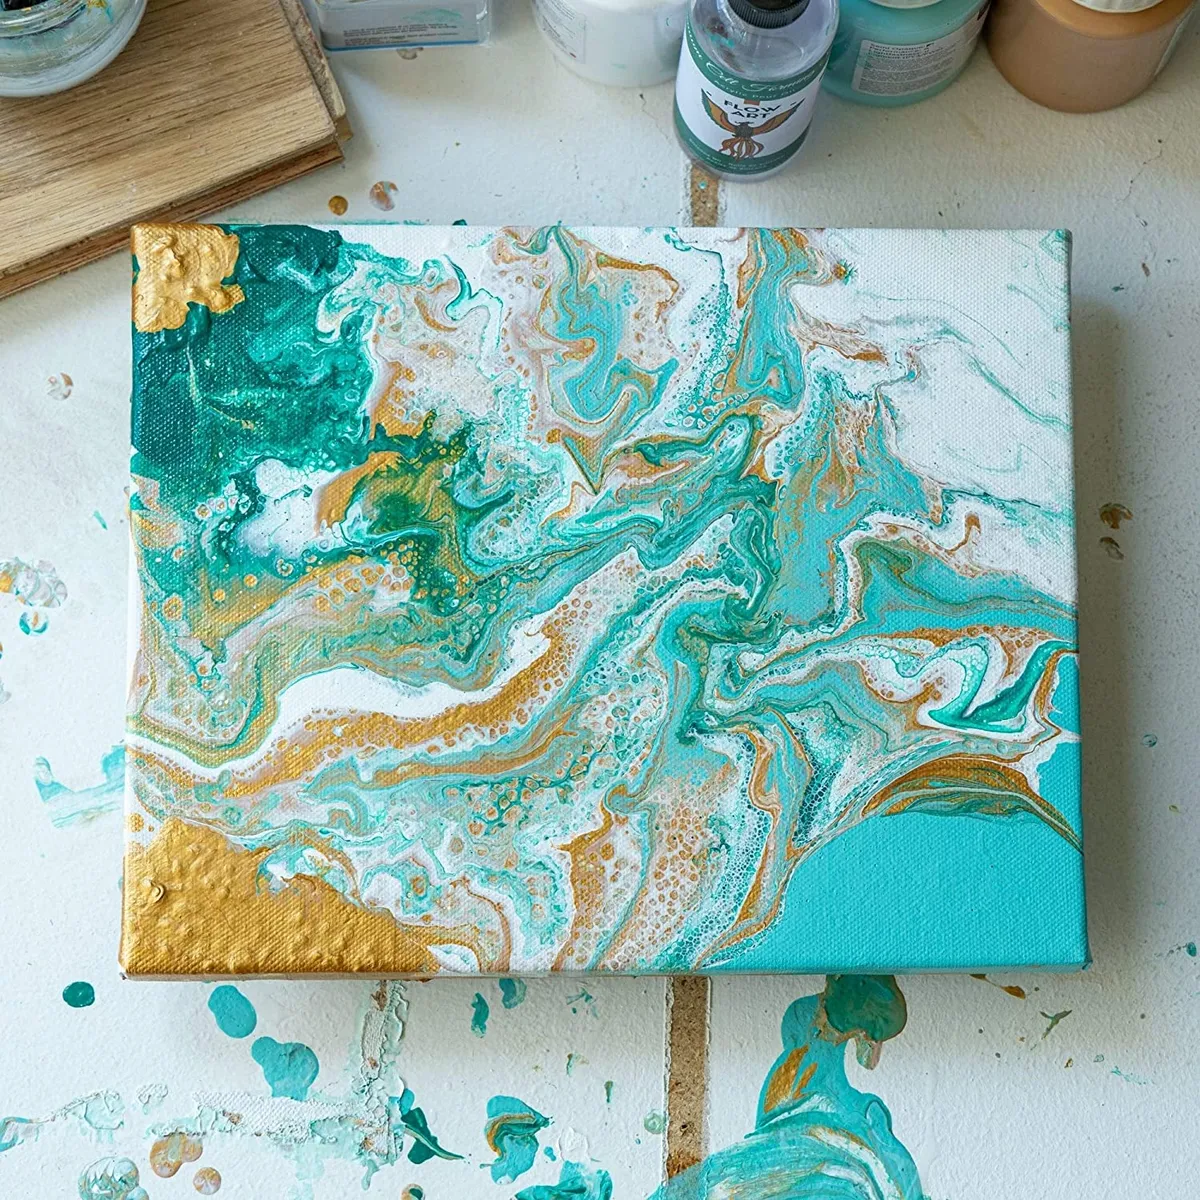 Try acrylic pour painting and go with the flow